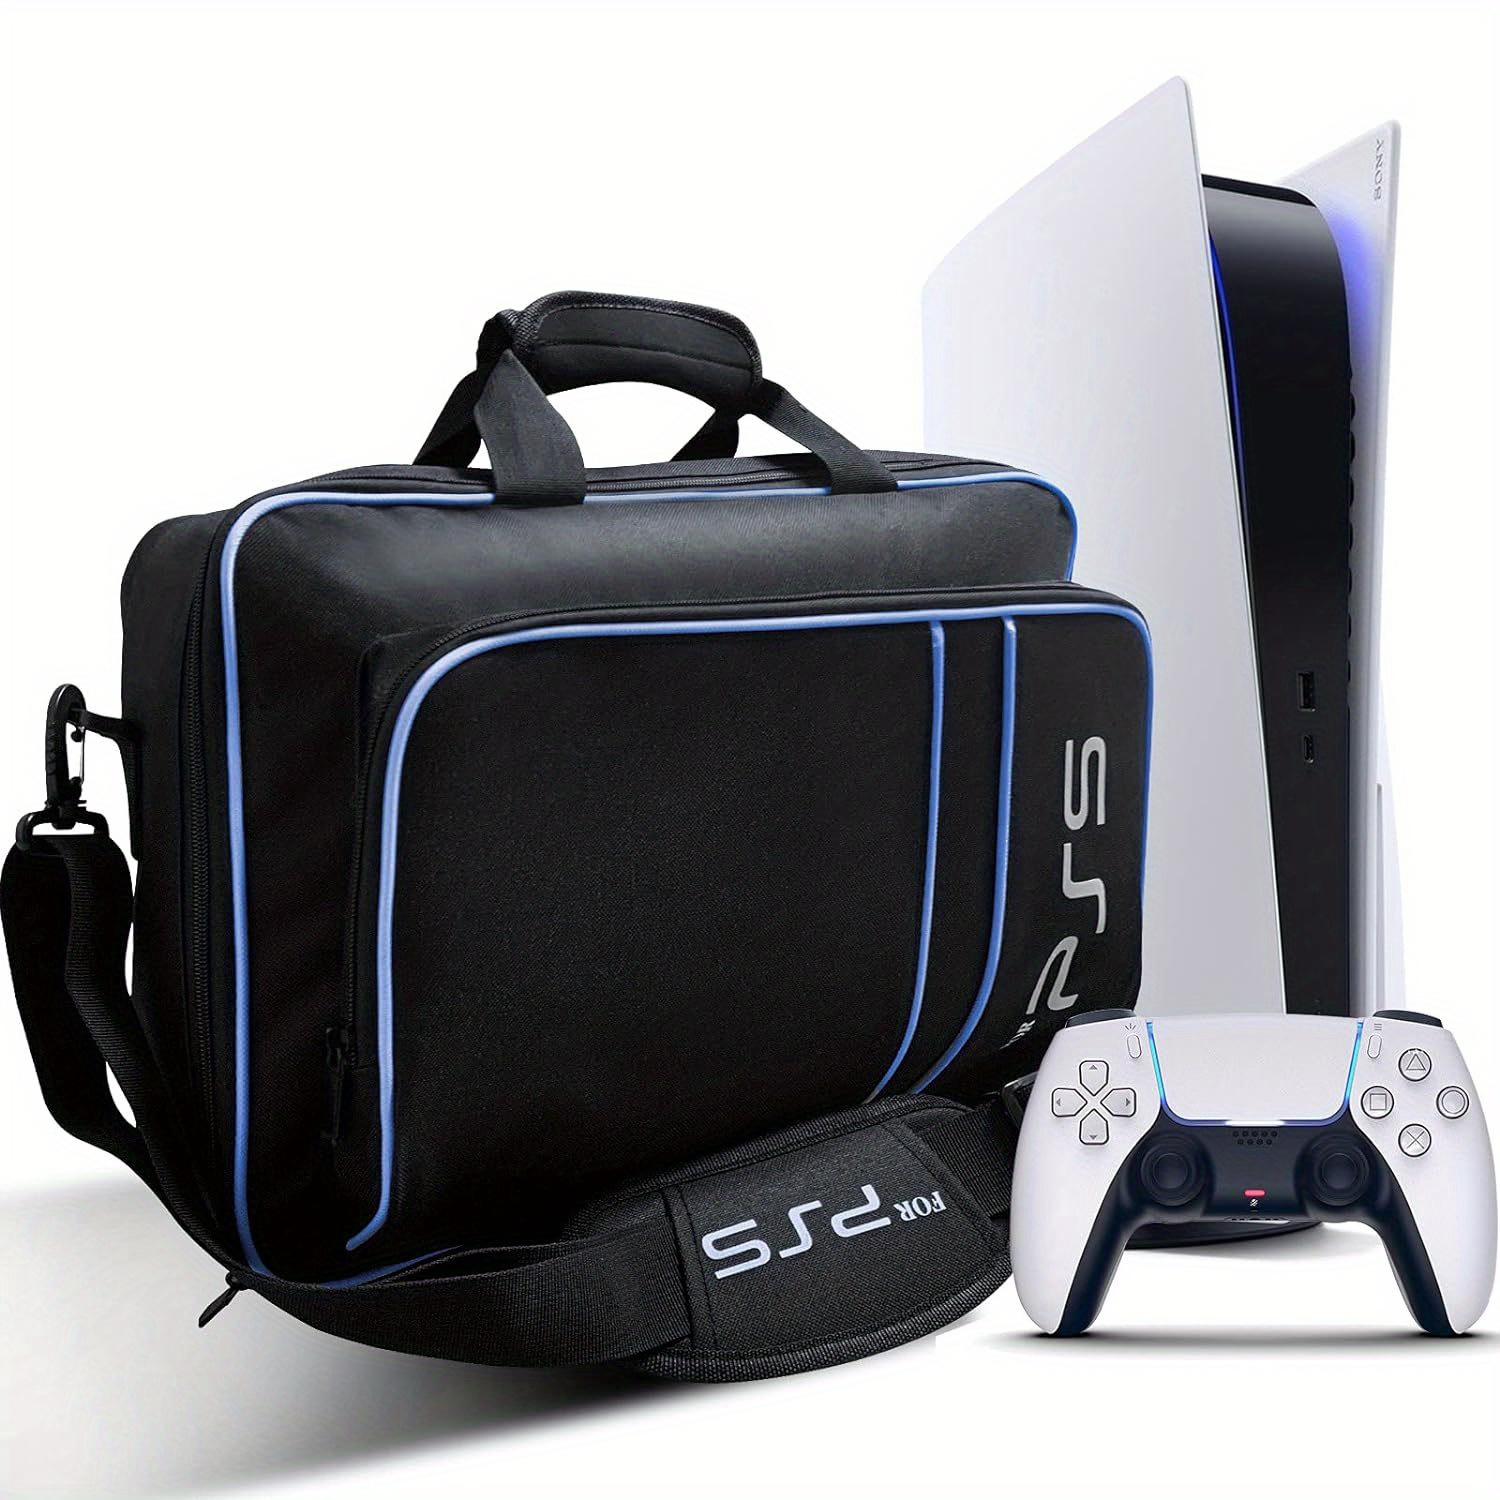 

Carrying Case For Ps5, Protective Travel Case For Ps5 Console Disc/digital Edition, Large Capacity Shoulder Bag Zippered Storage Bag For Ps5 Console, , Game Discs, & Other Accessories